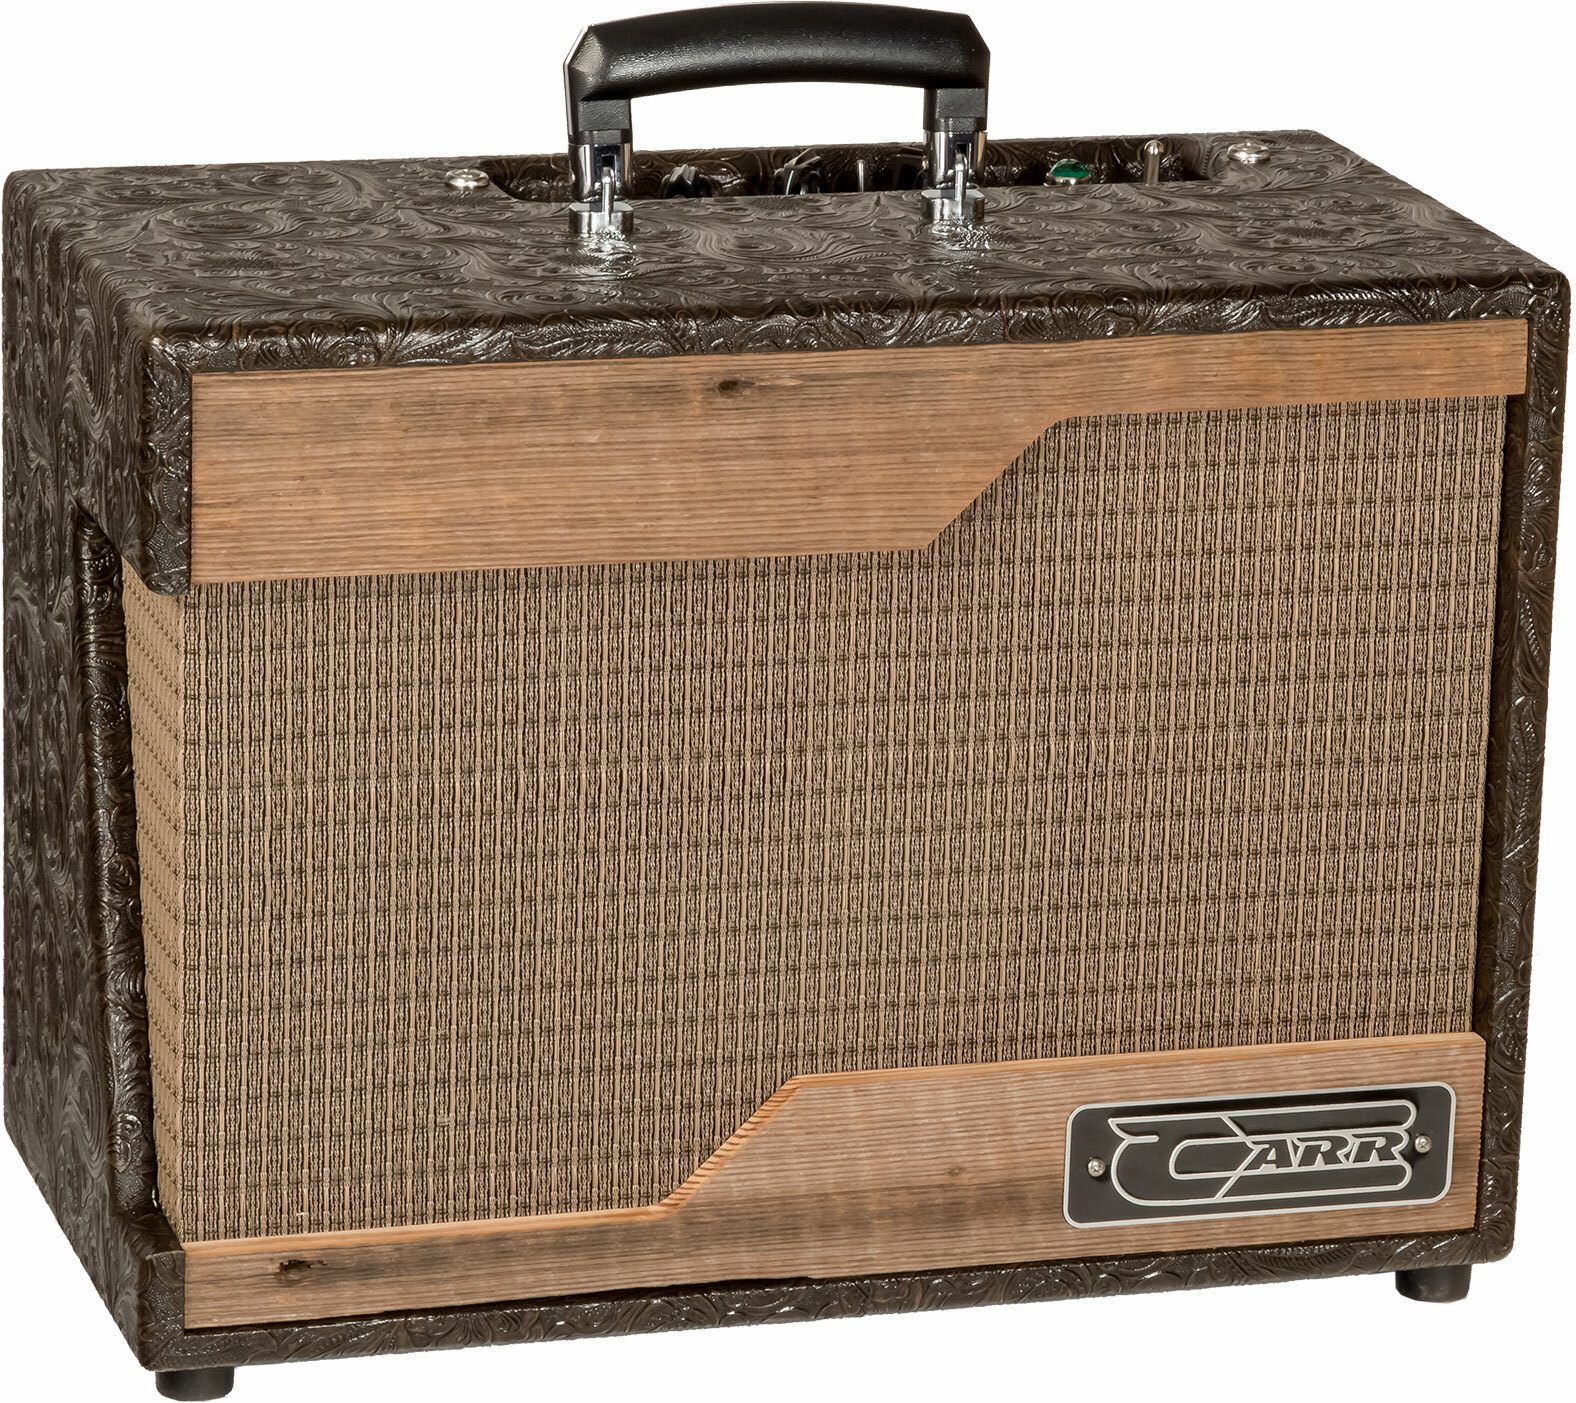 Carr Amplifiers Raleigh 1-10 Combo 5w 1x10 El84 Barn Panels - Electric guitar combo amp - Main picture